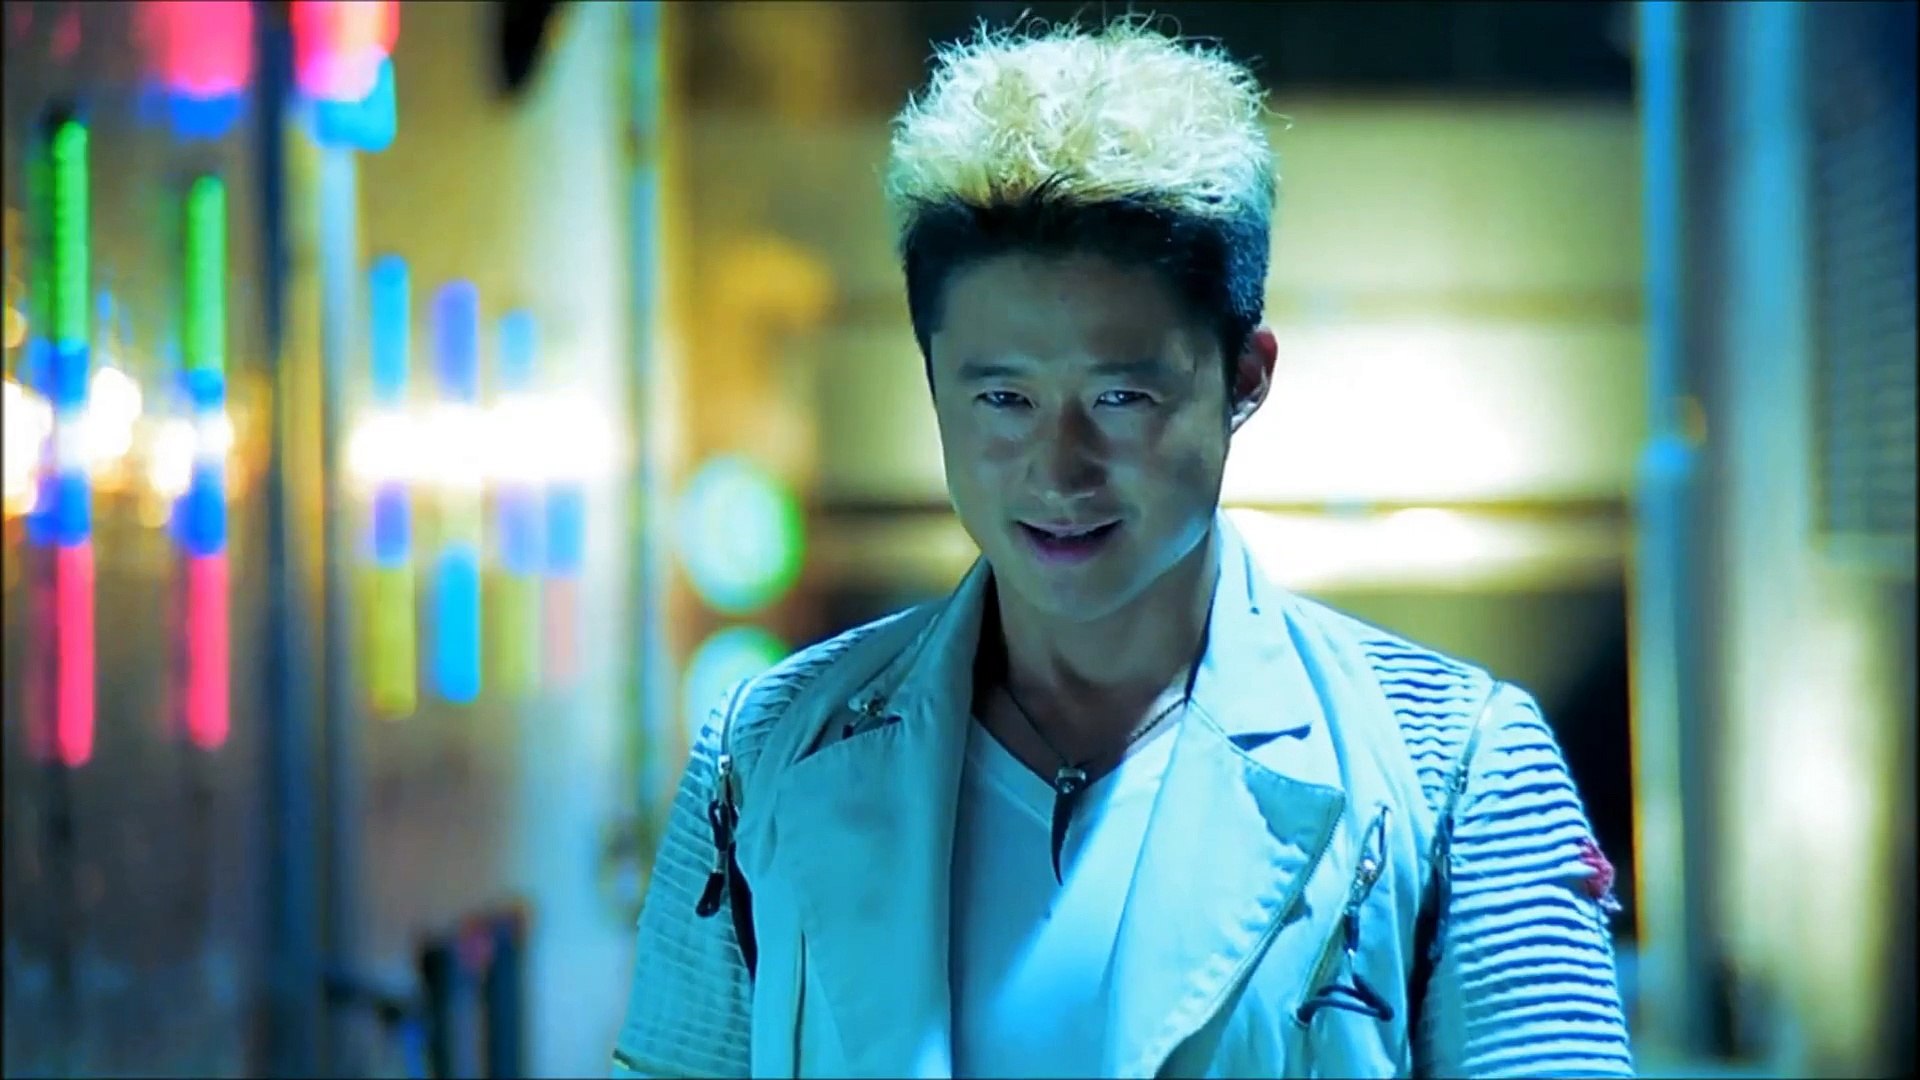 FOOT FIST FRIDAYS: Donnie Yen and Wu Jing Square Off with Lightning  Precision in SPL (KILL ZONE)! – ACTION-FLIX